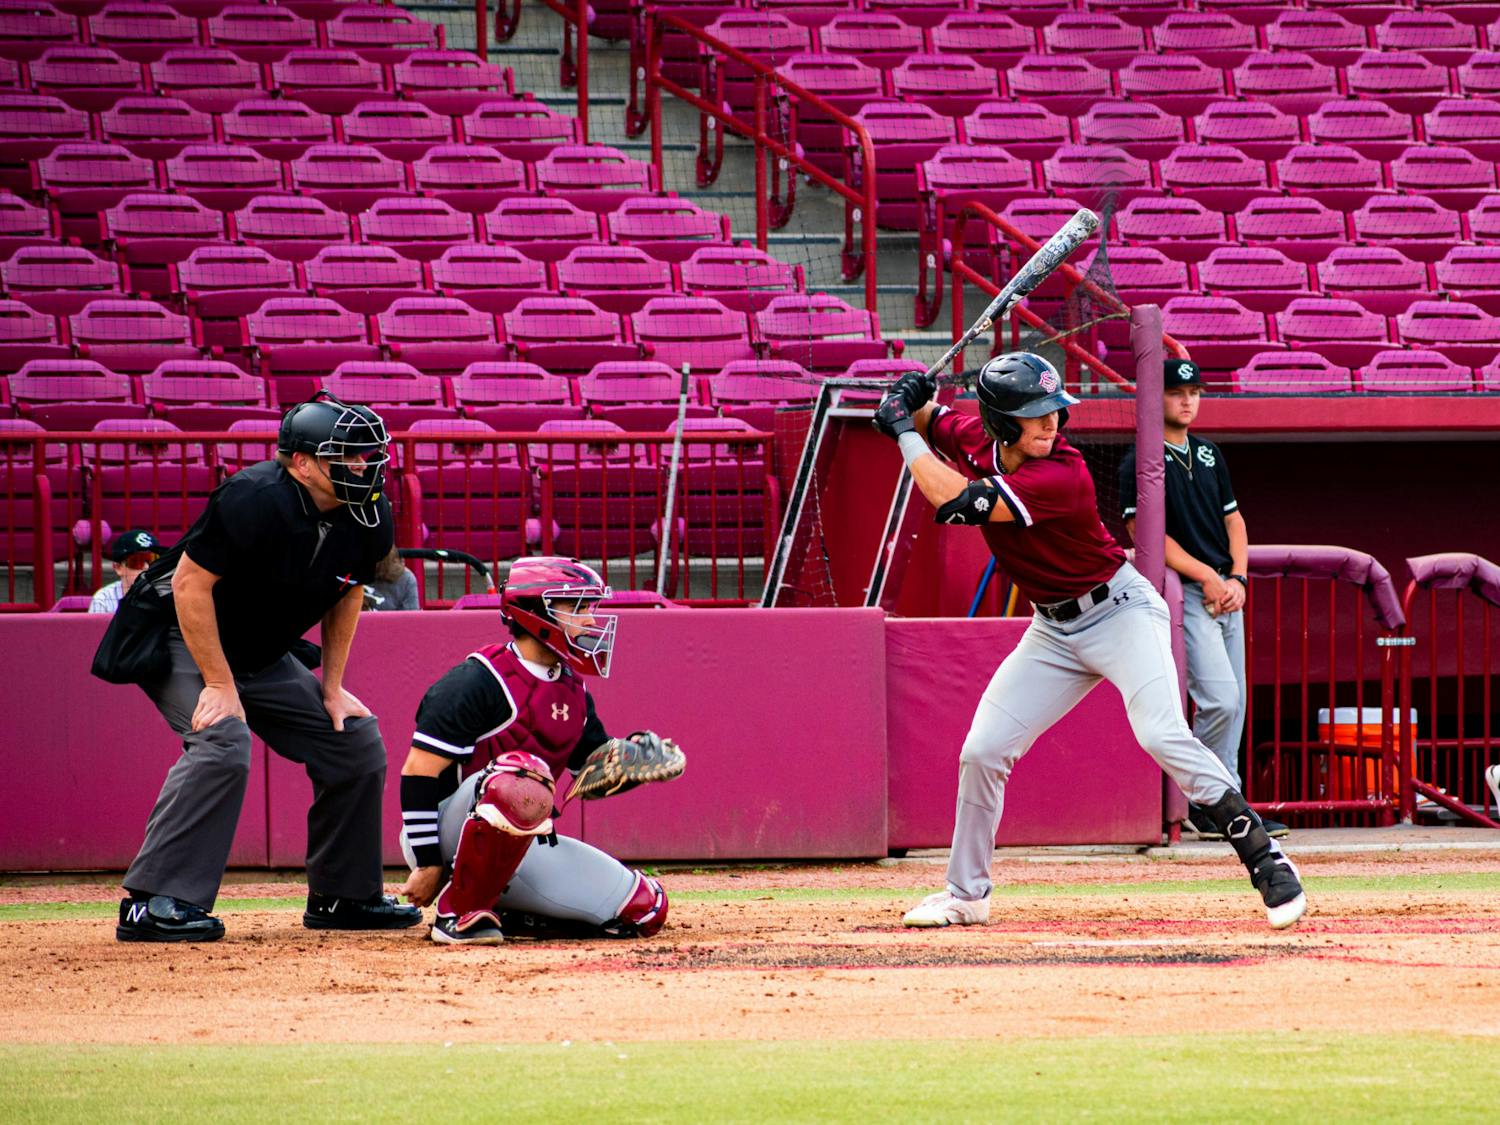 Members of the Garnet team stepped up to the plate during an intrasquad scrimmage on Nov. 2, 2022, pitting members of the South Carolina baseball team against each other. The game was the first of three in this year's Garnet and Black World Series.